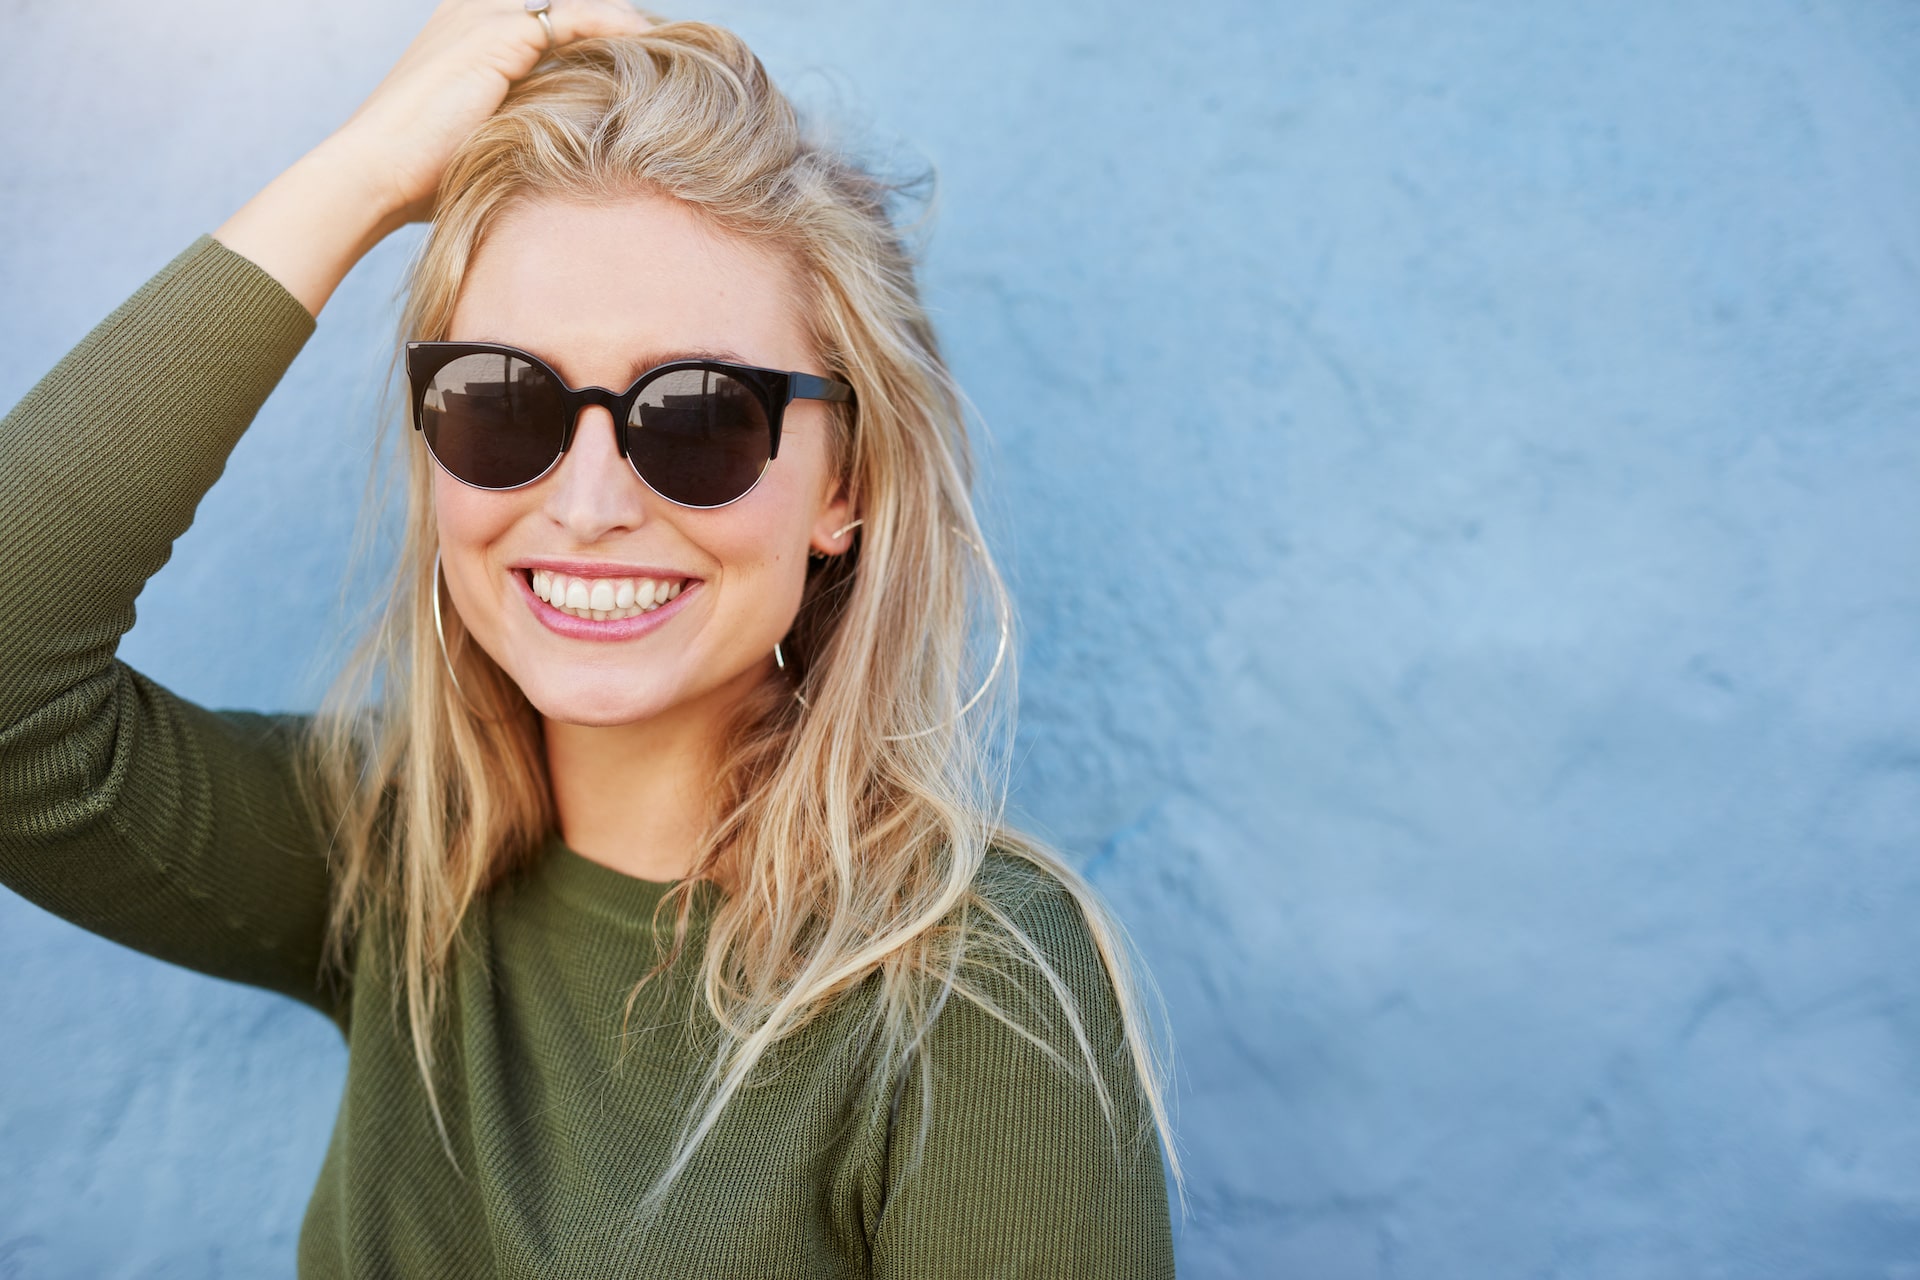 Women in sunglasses smiling in front of blue wall